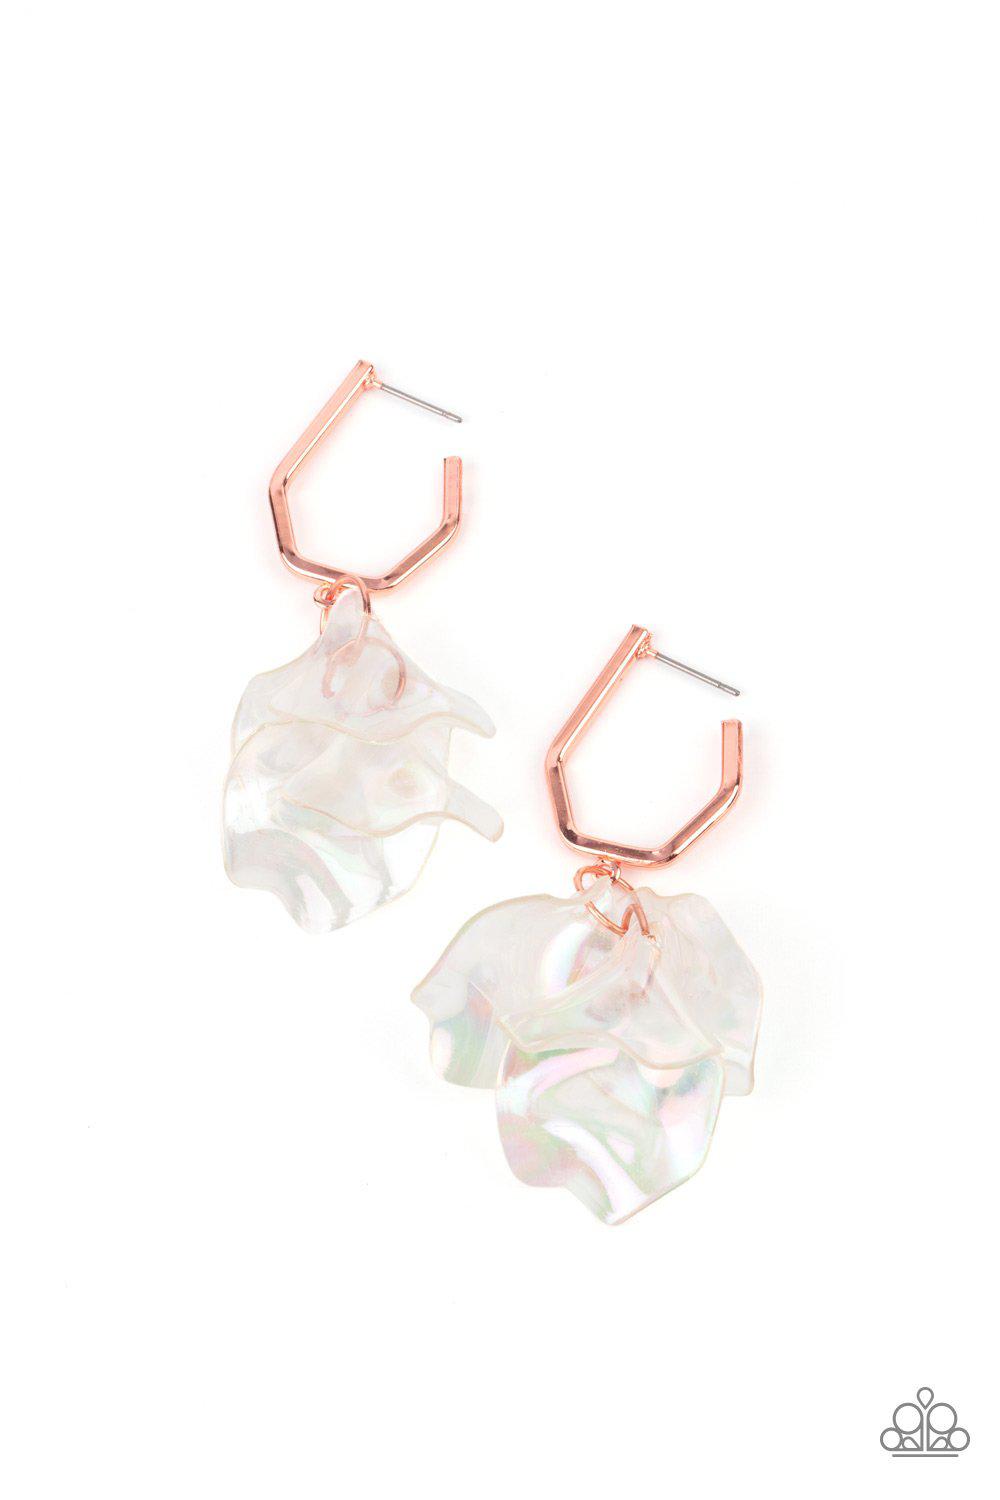 Jaw-Droppingly Jelly Copper and Iridescent Acrylic Petal Hoop Earrings - Paparazzi Accessories- lightbox - CarasShop.com - $5 Jewelry by Cara Jewels